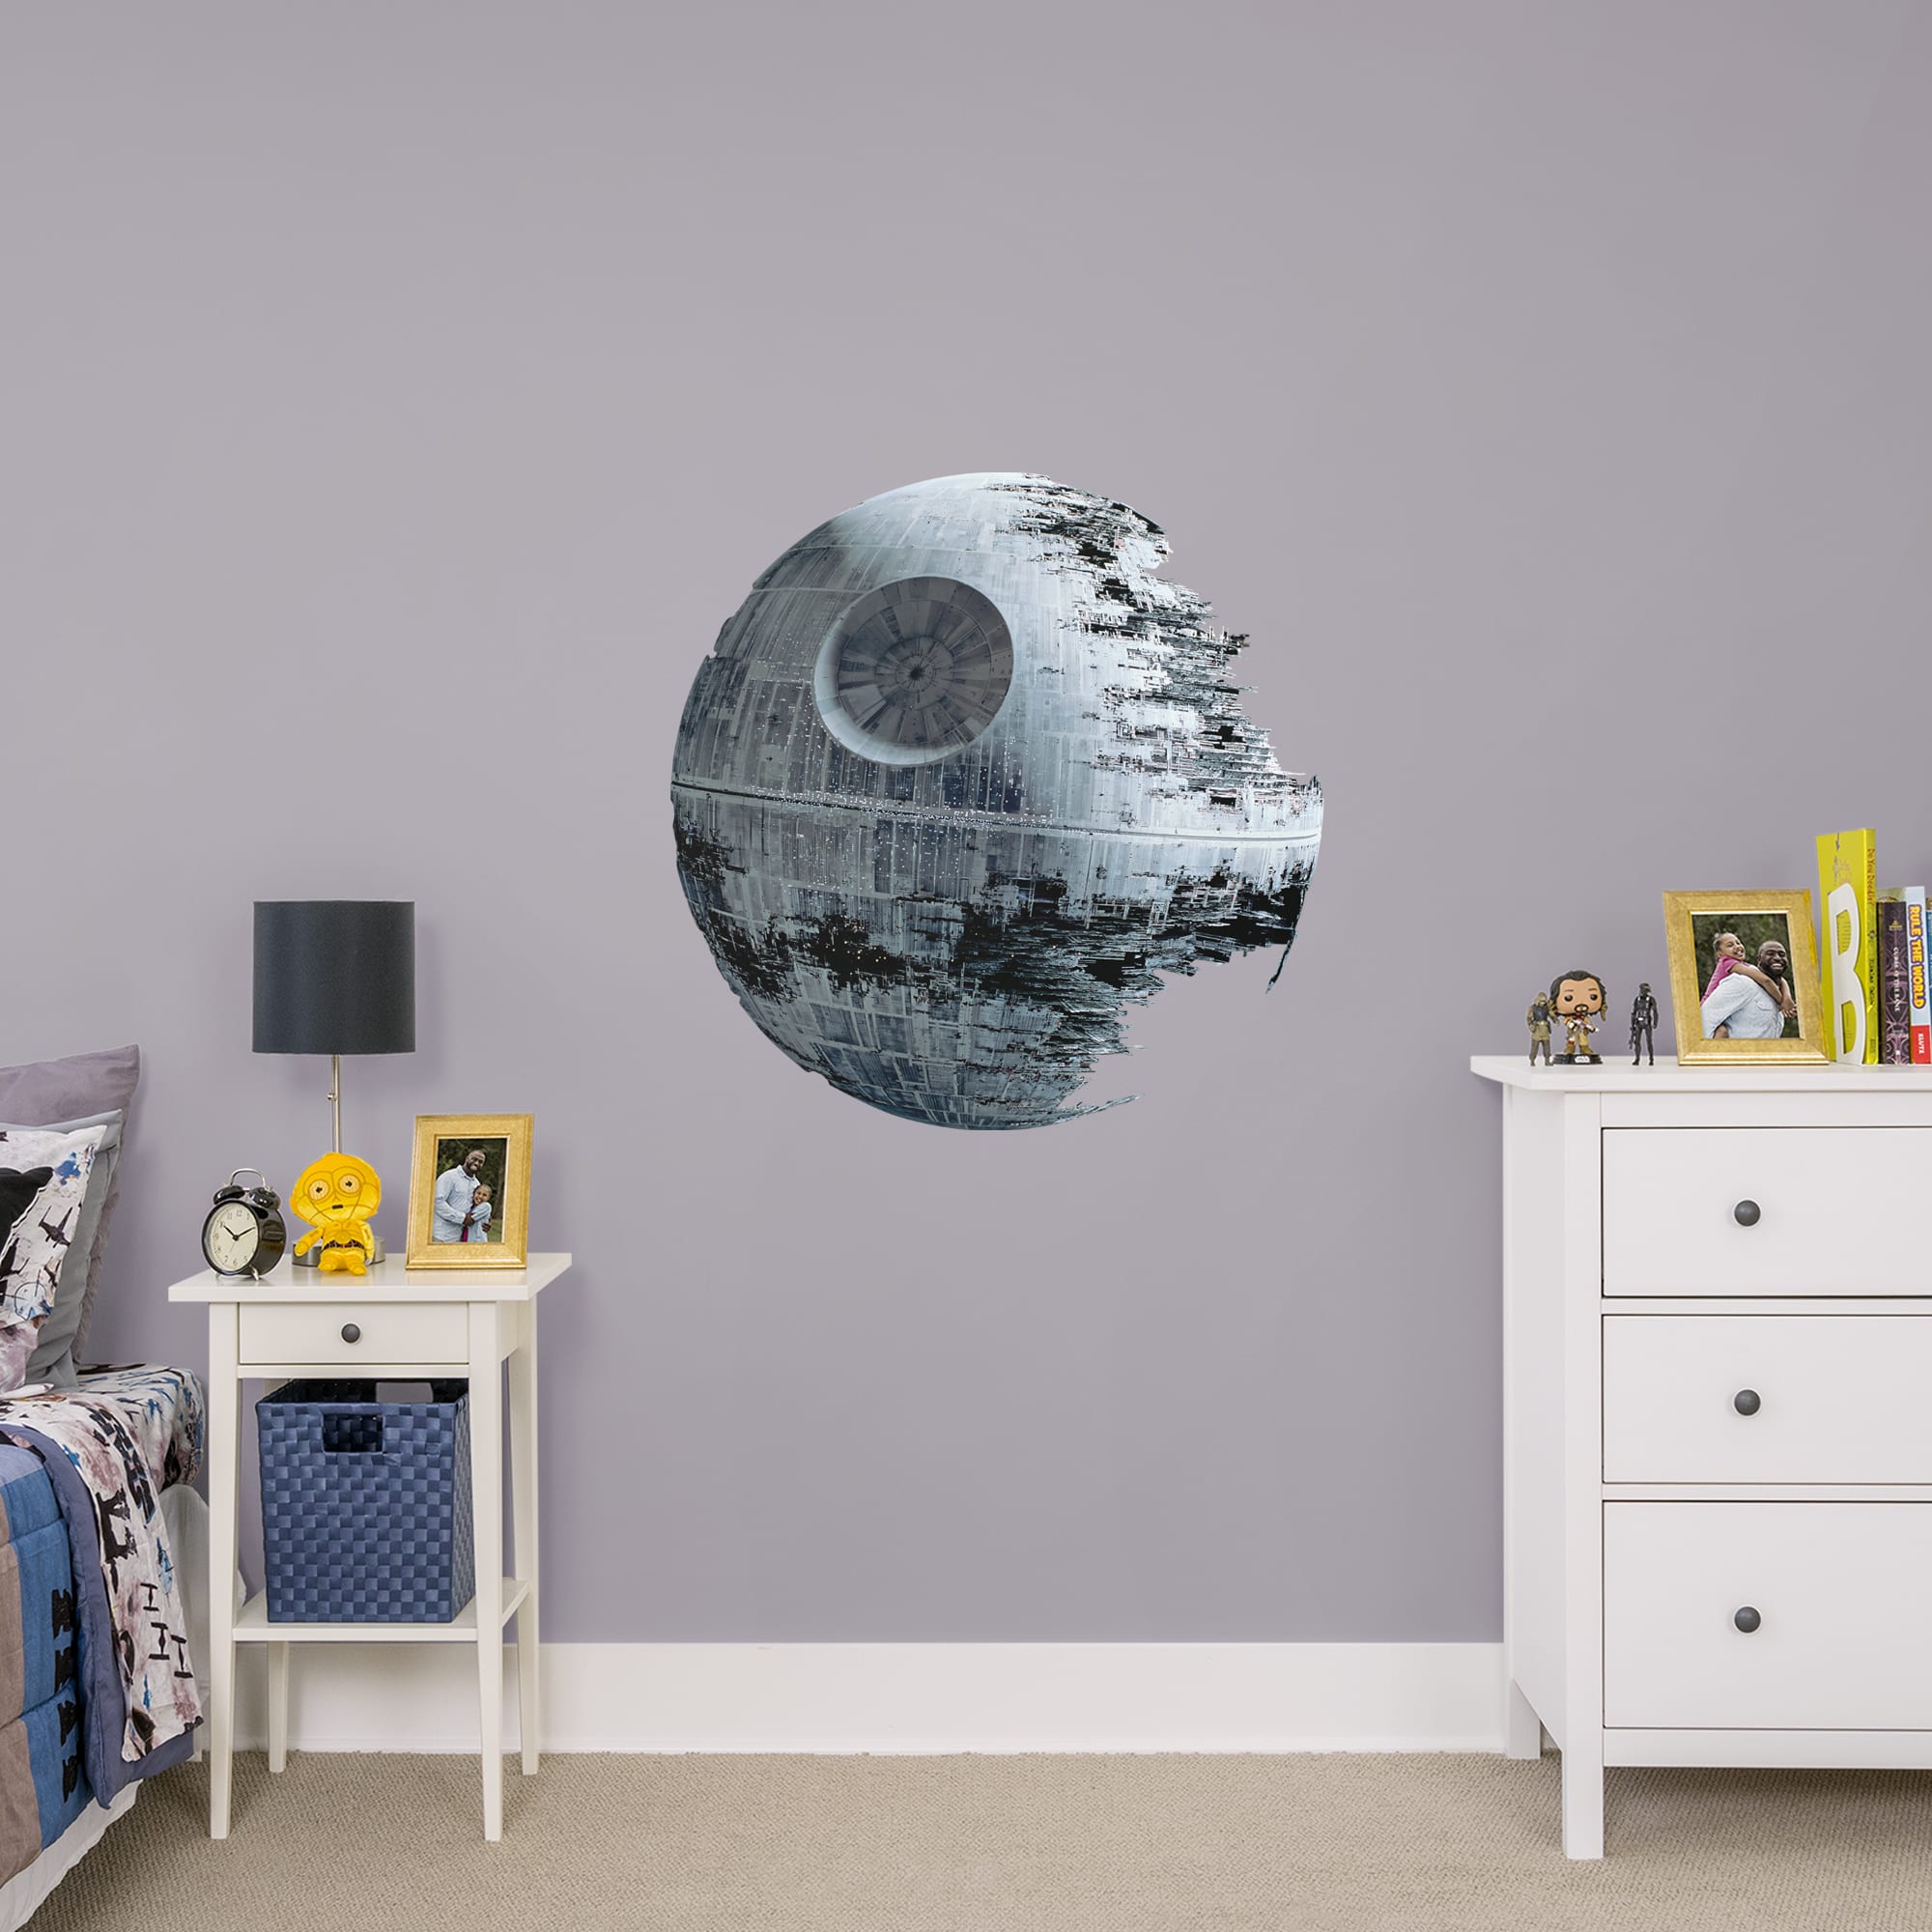 Death Star - Officially Licensed Removable Wall Decal Giant Ship + 1 Decal (40"W x 40"H) by Fathead | Vinyl